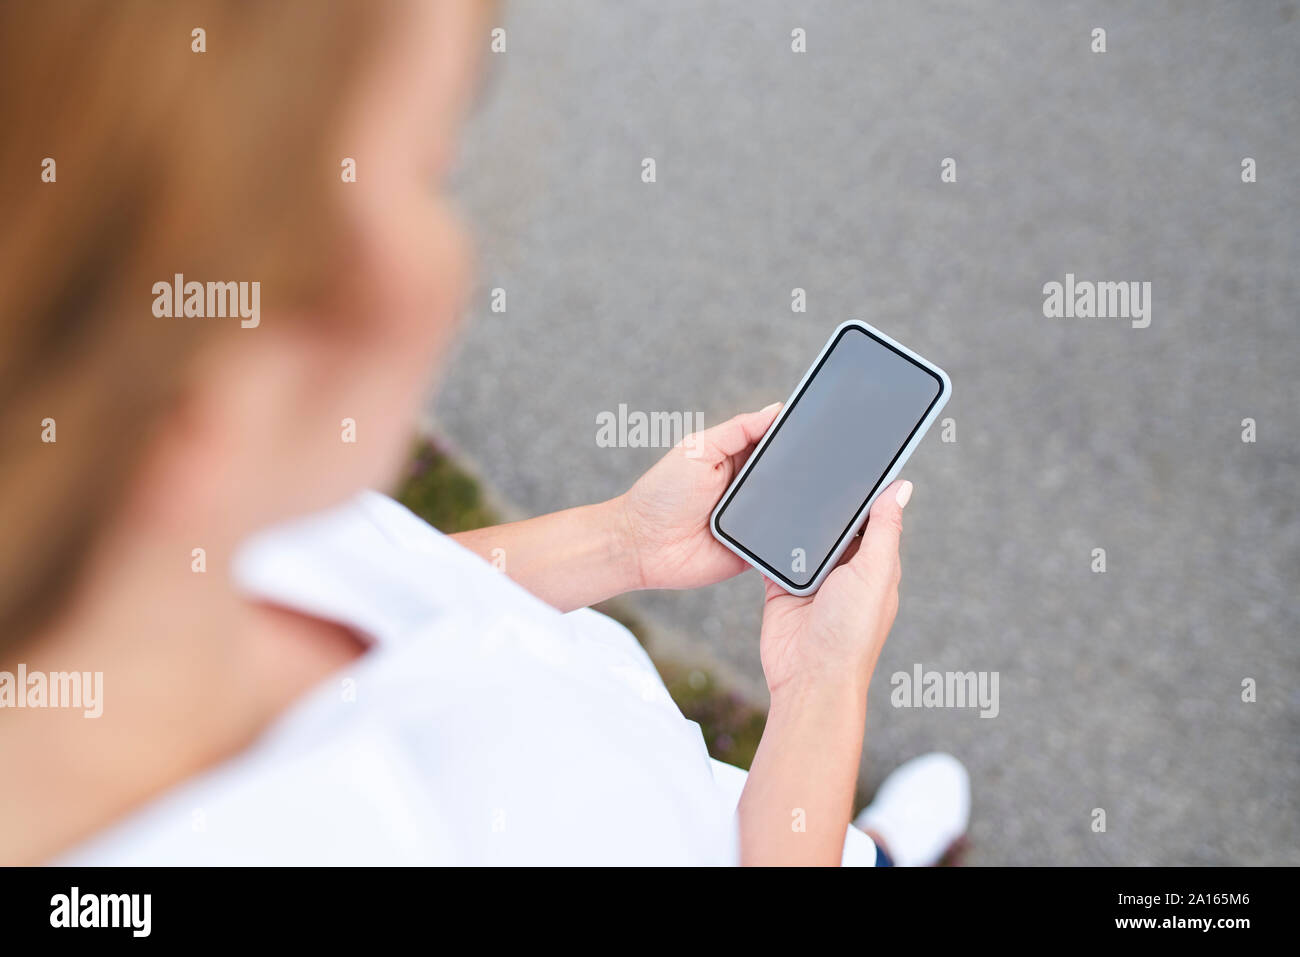 Close-up of woman using smartphone outdoors Banque D'Images